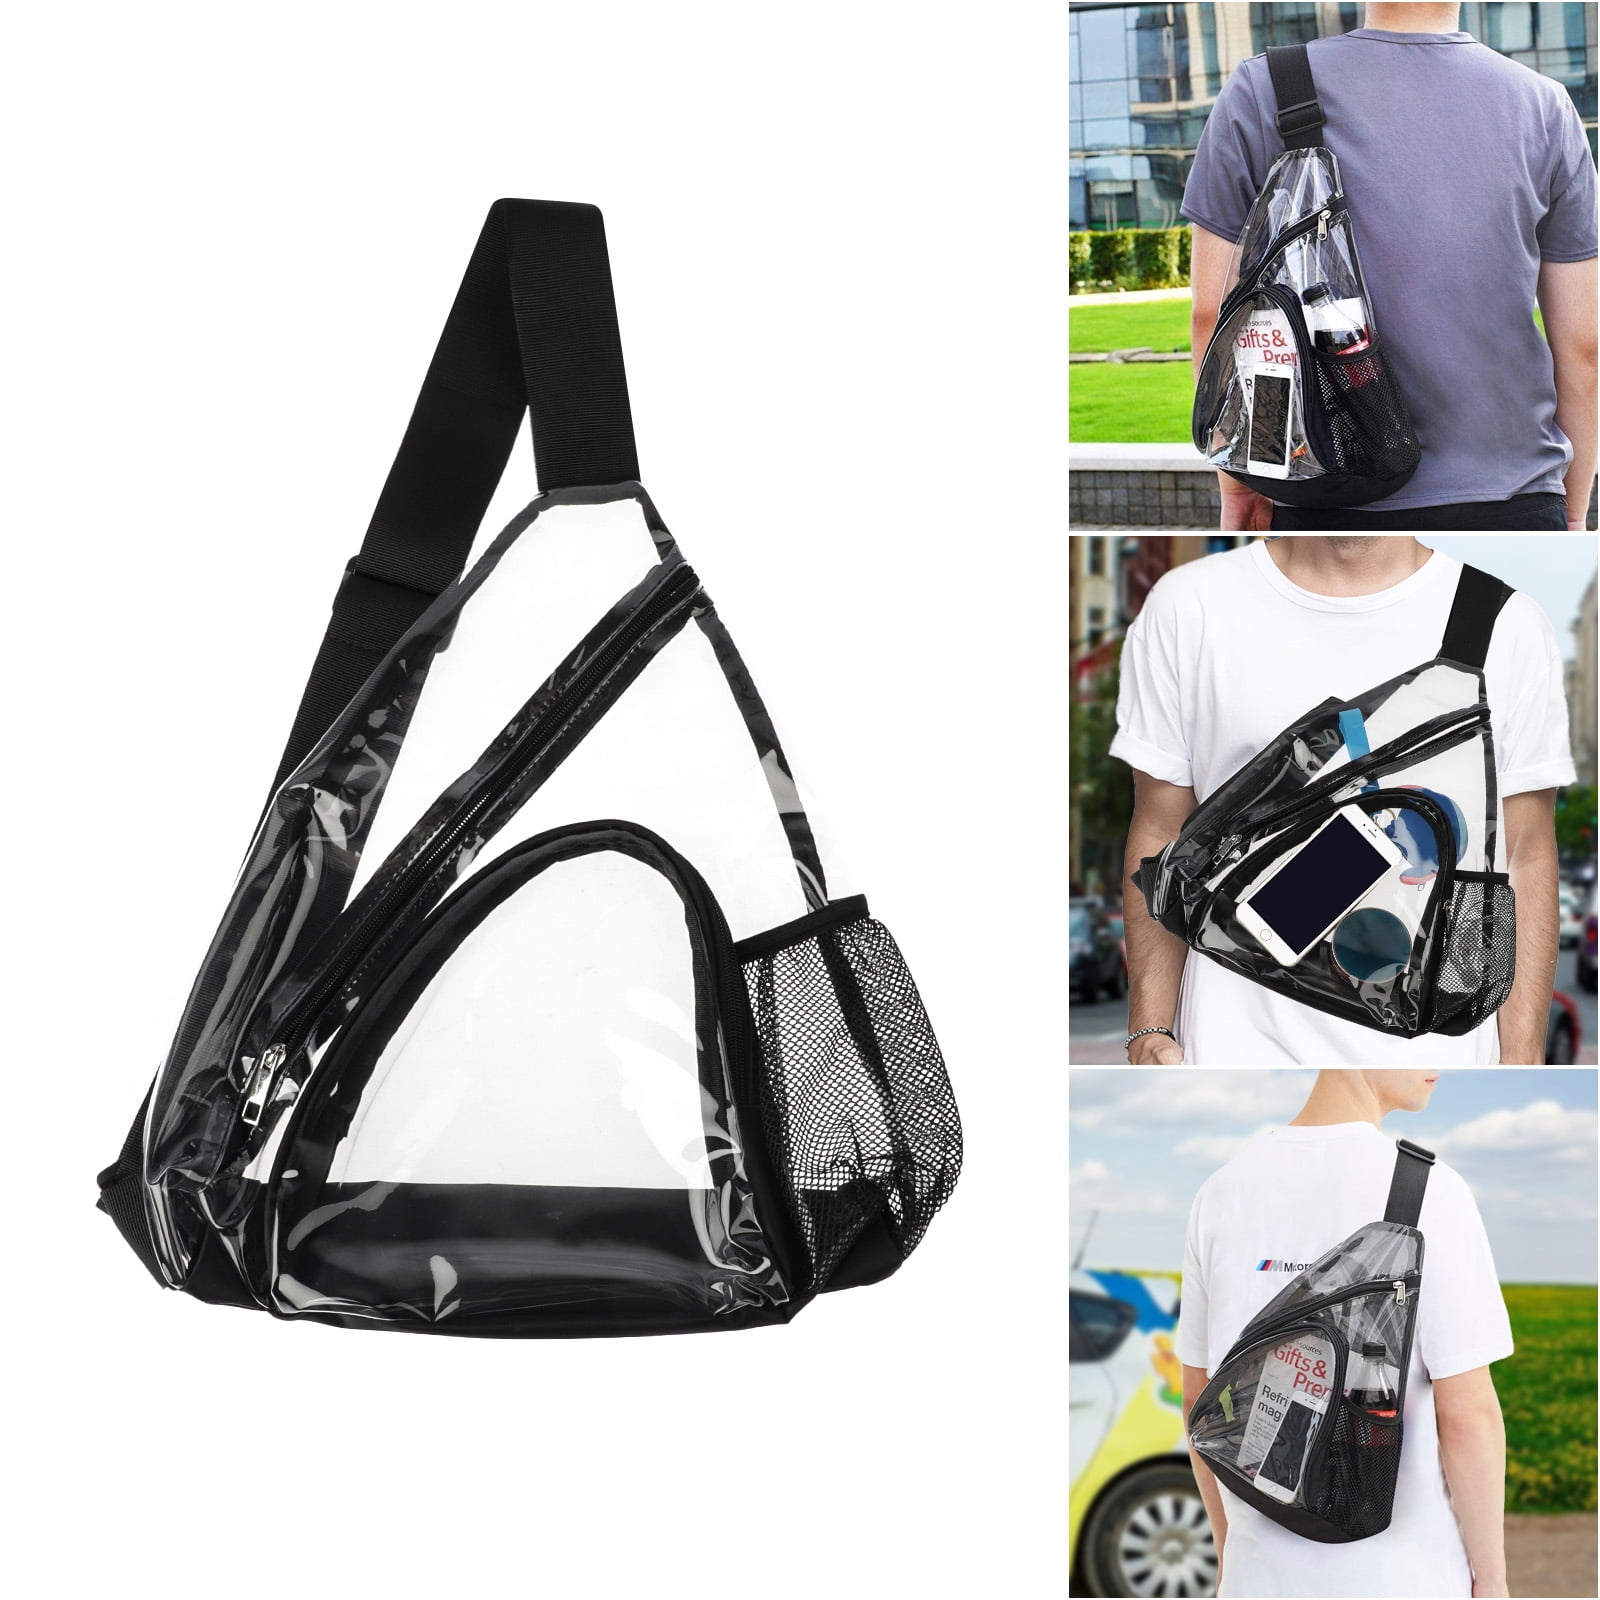  Telena Clear Sling Bag, Clear Fanny Pack Stadium Approved  Crossbody Bag Purses for Women Heavy Duty Transparent Chest Bag with  Adjustable Strap Black Weave